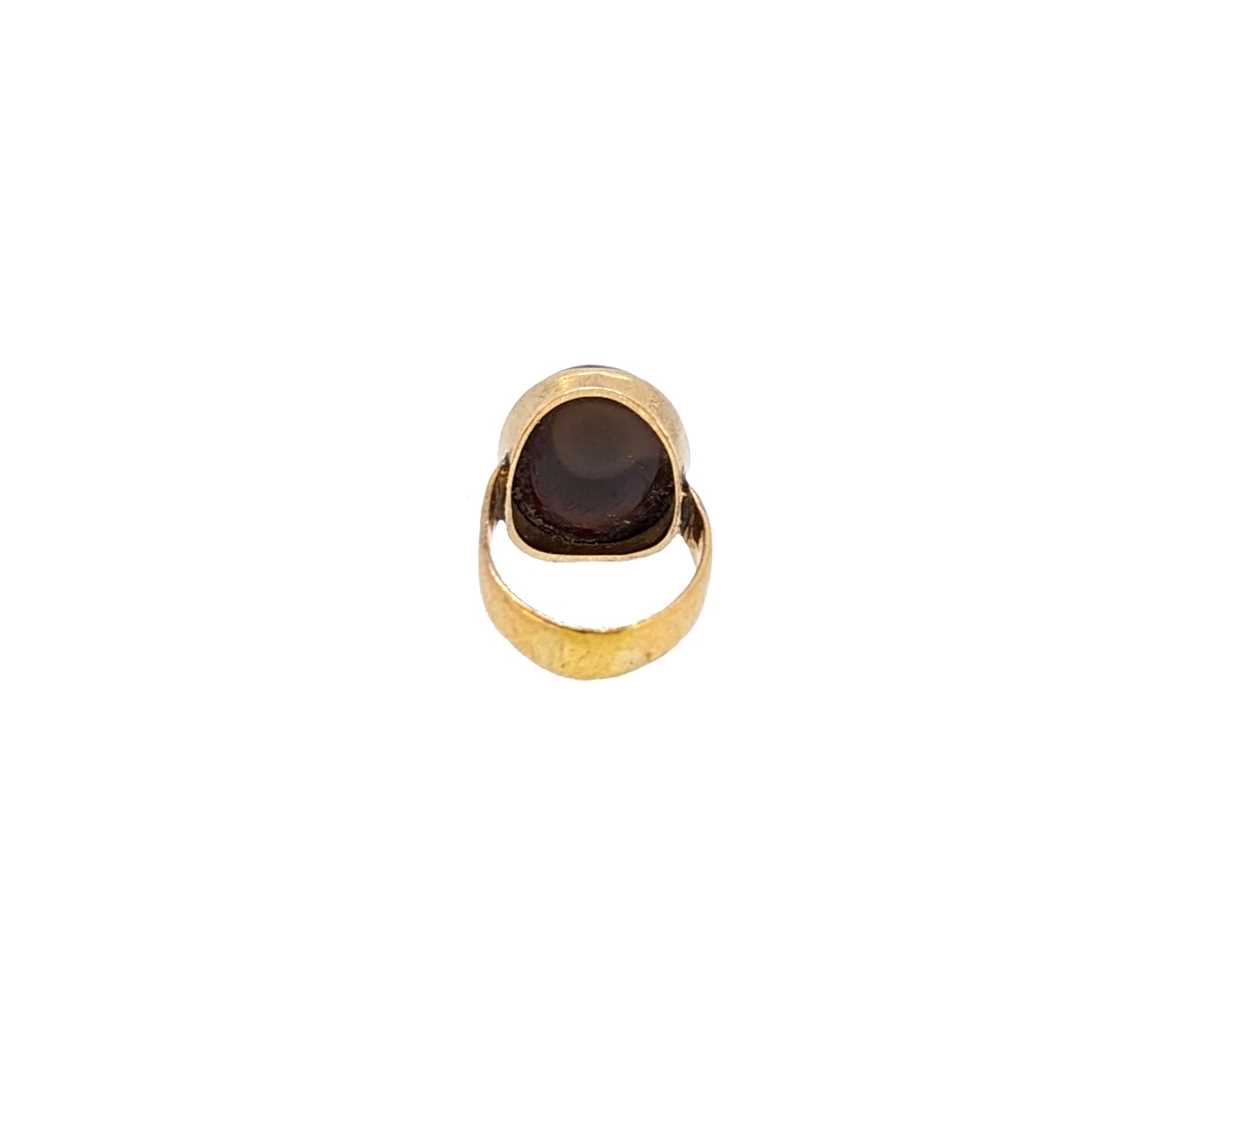 A banded agate ring, - Image 3 of 3